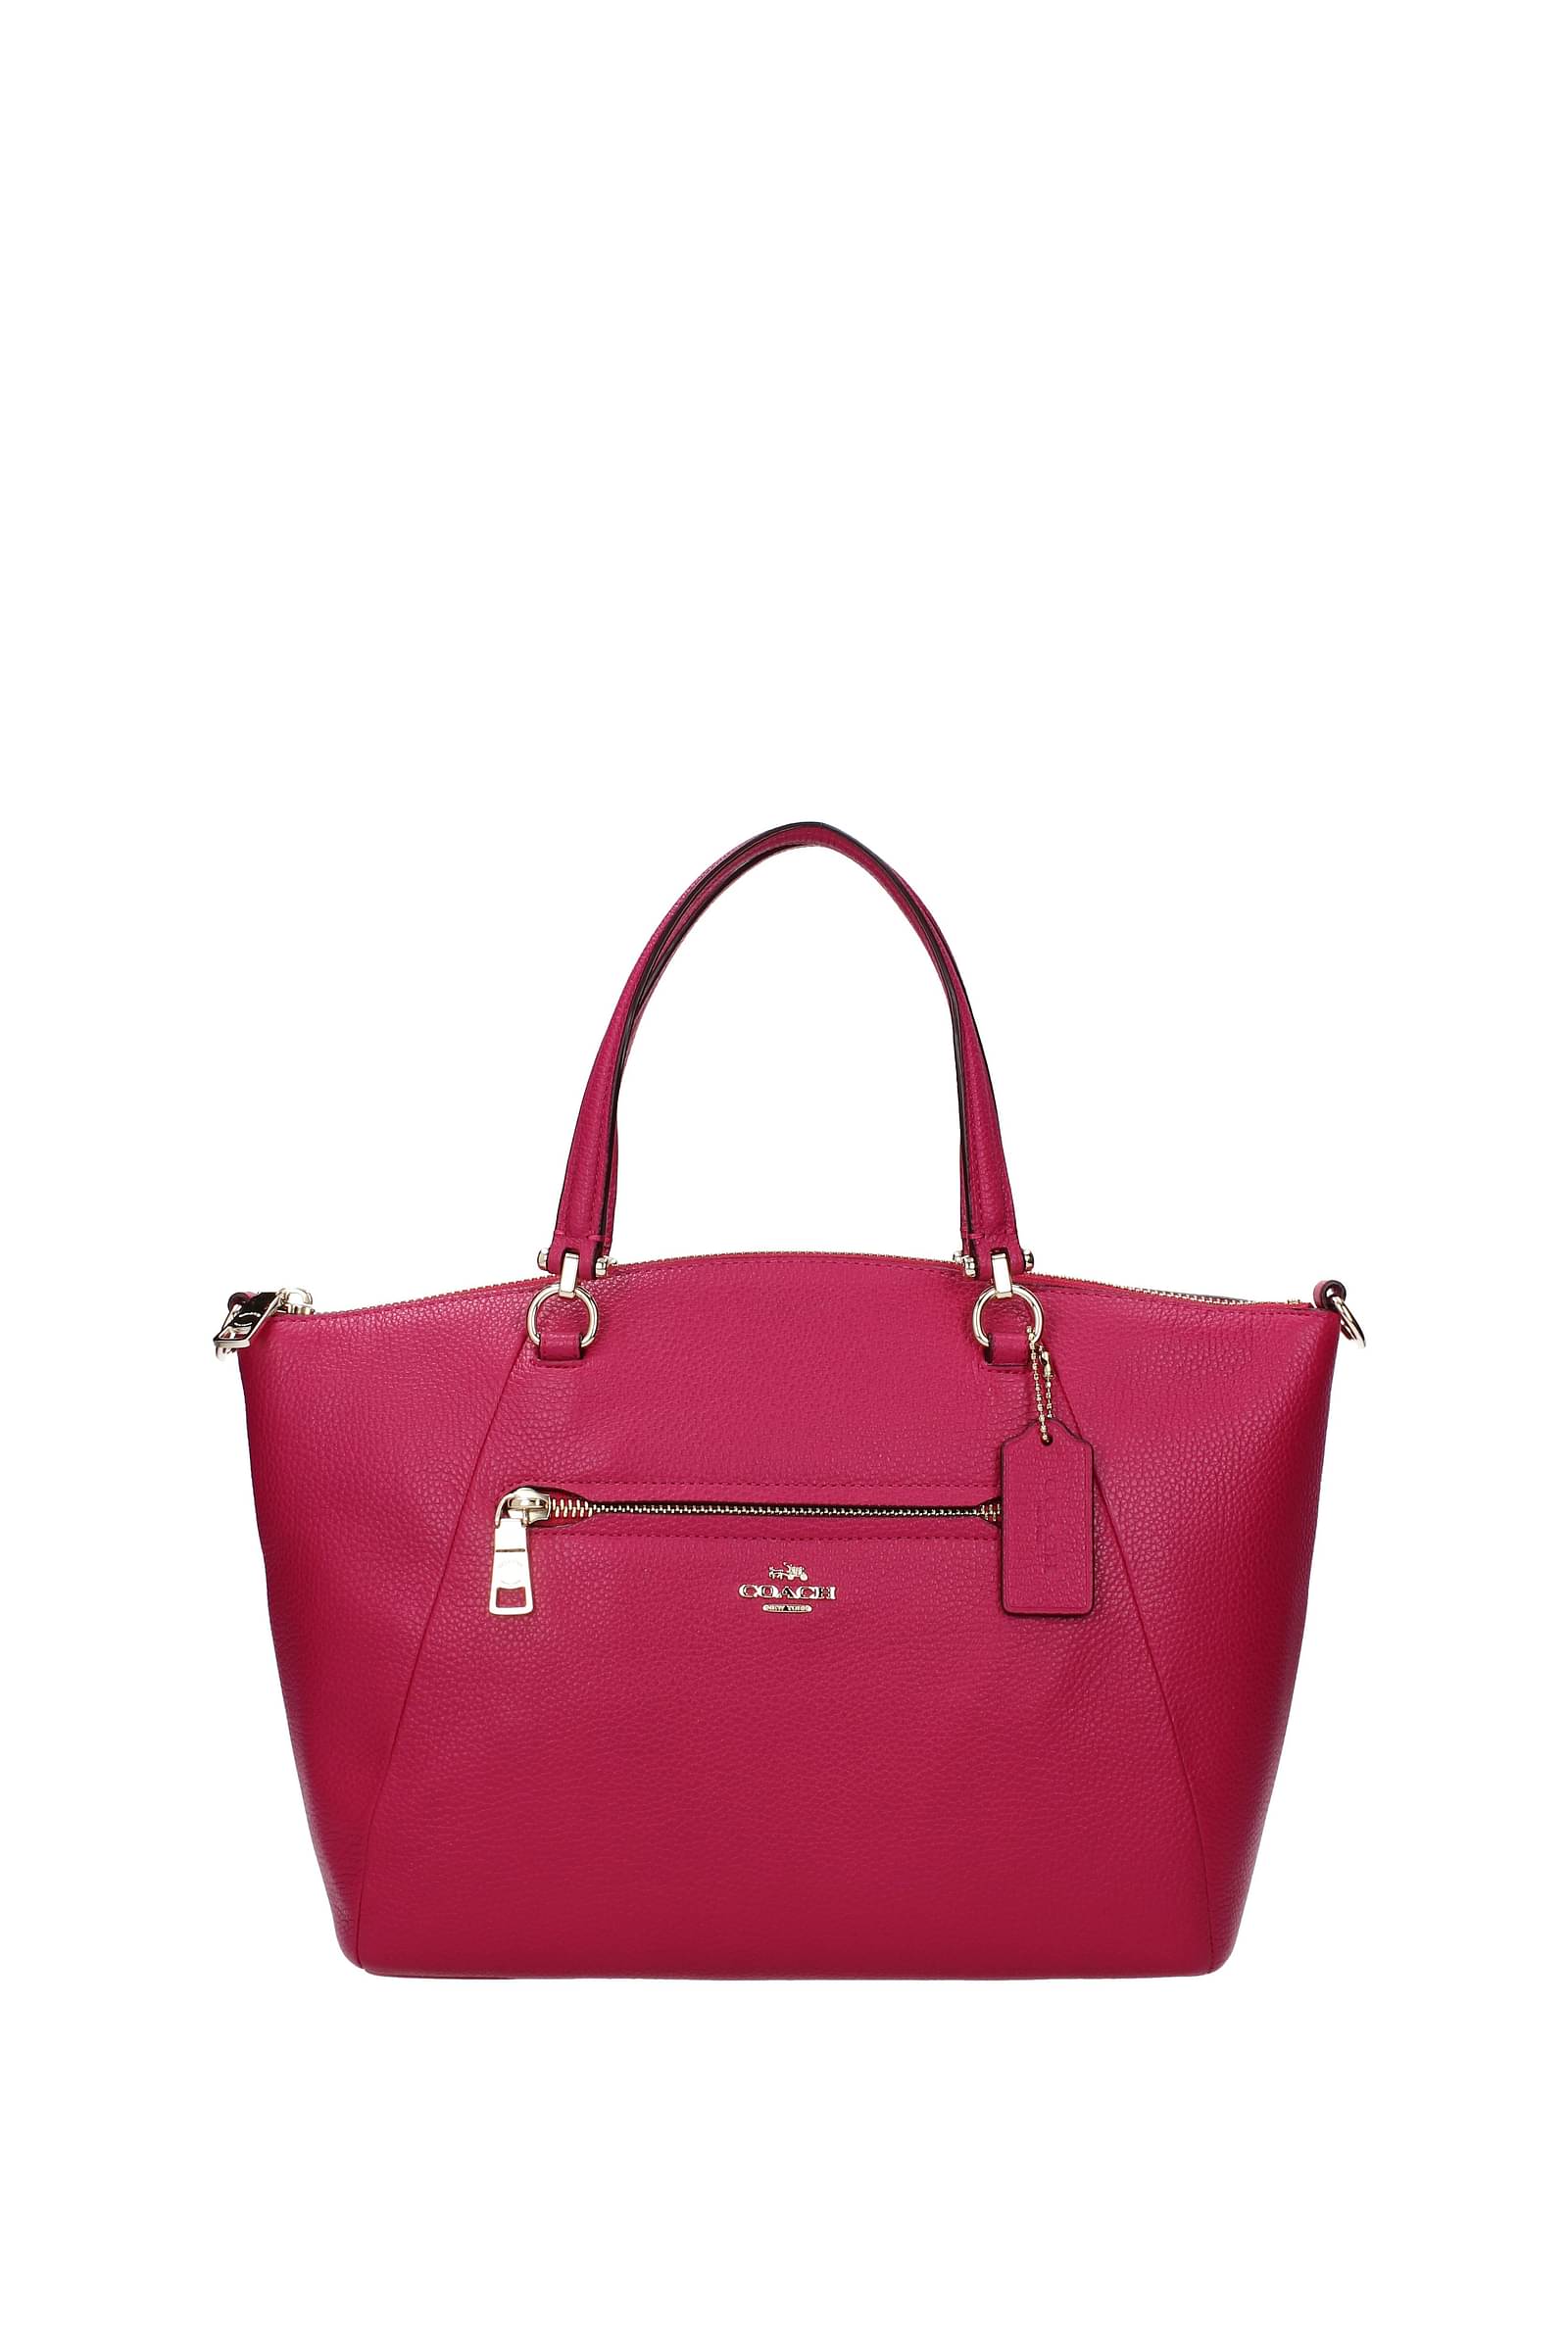 Coach bags on sale at outlet, special offers